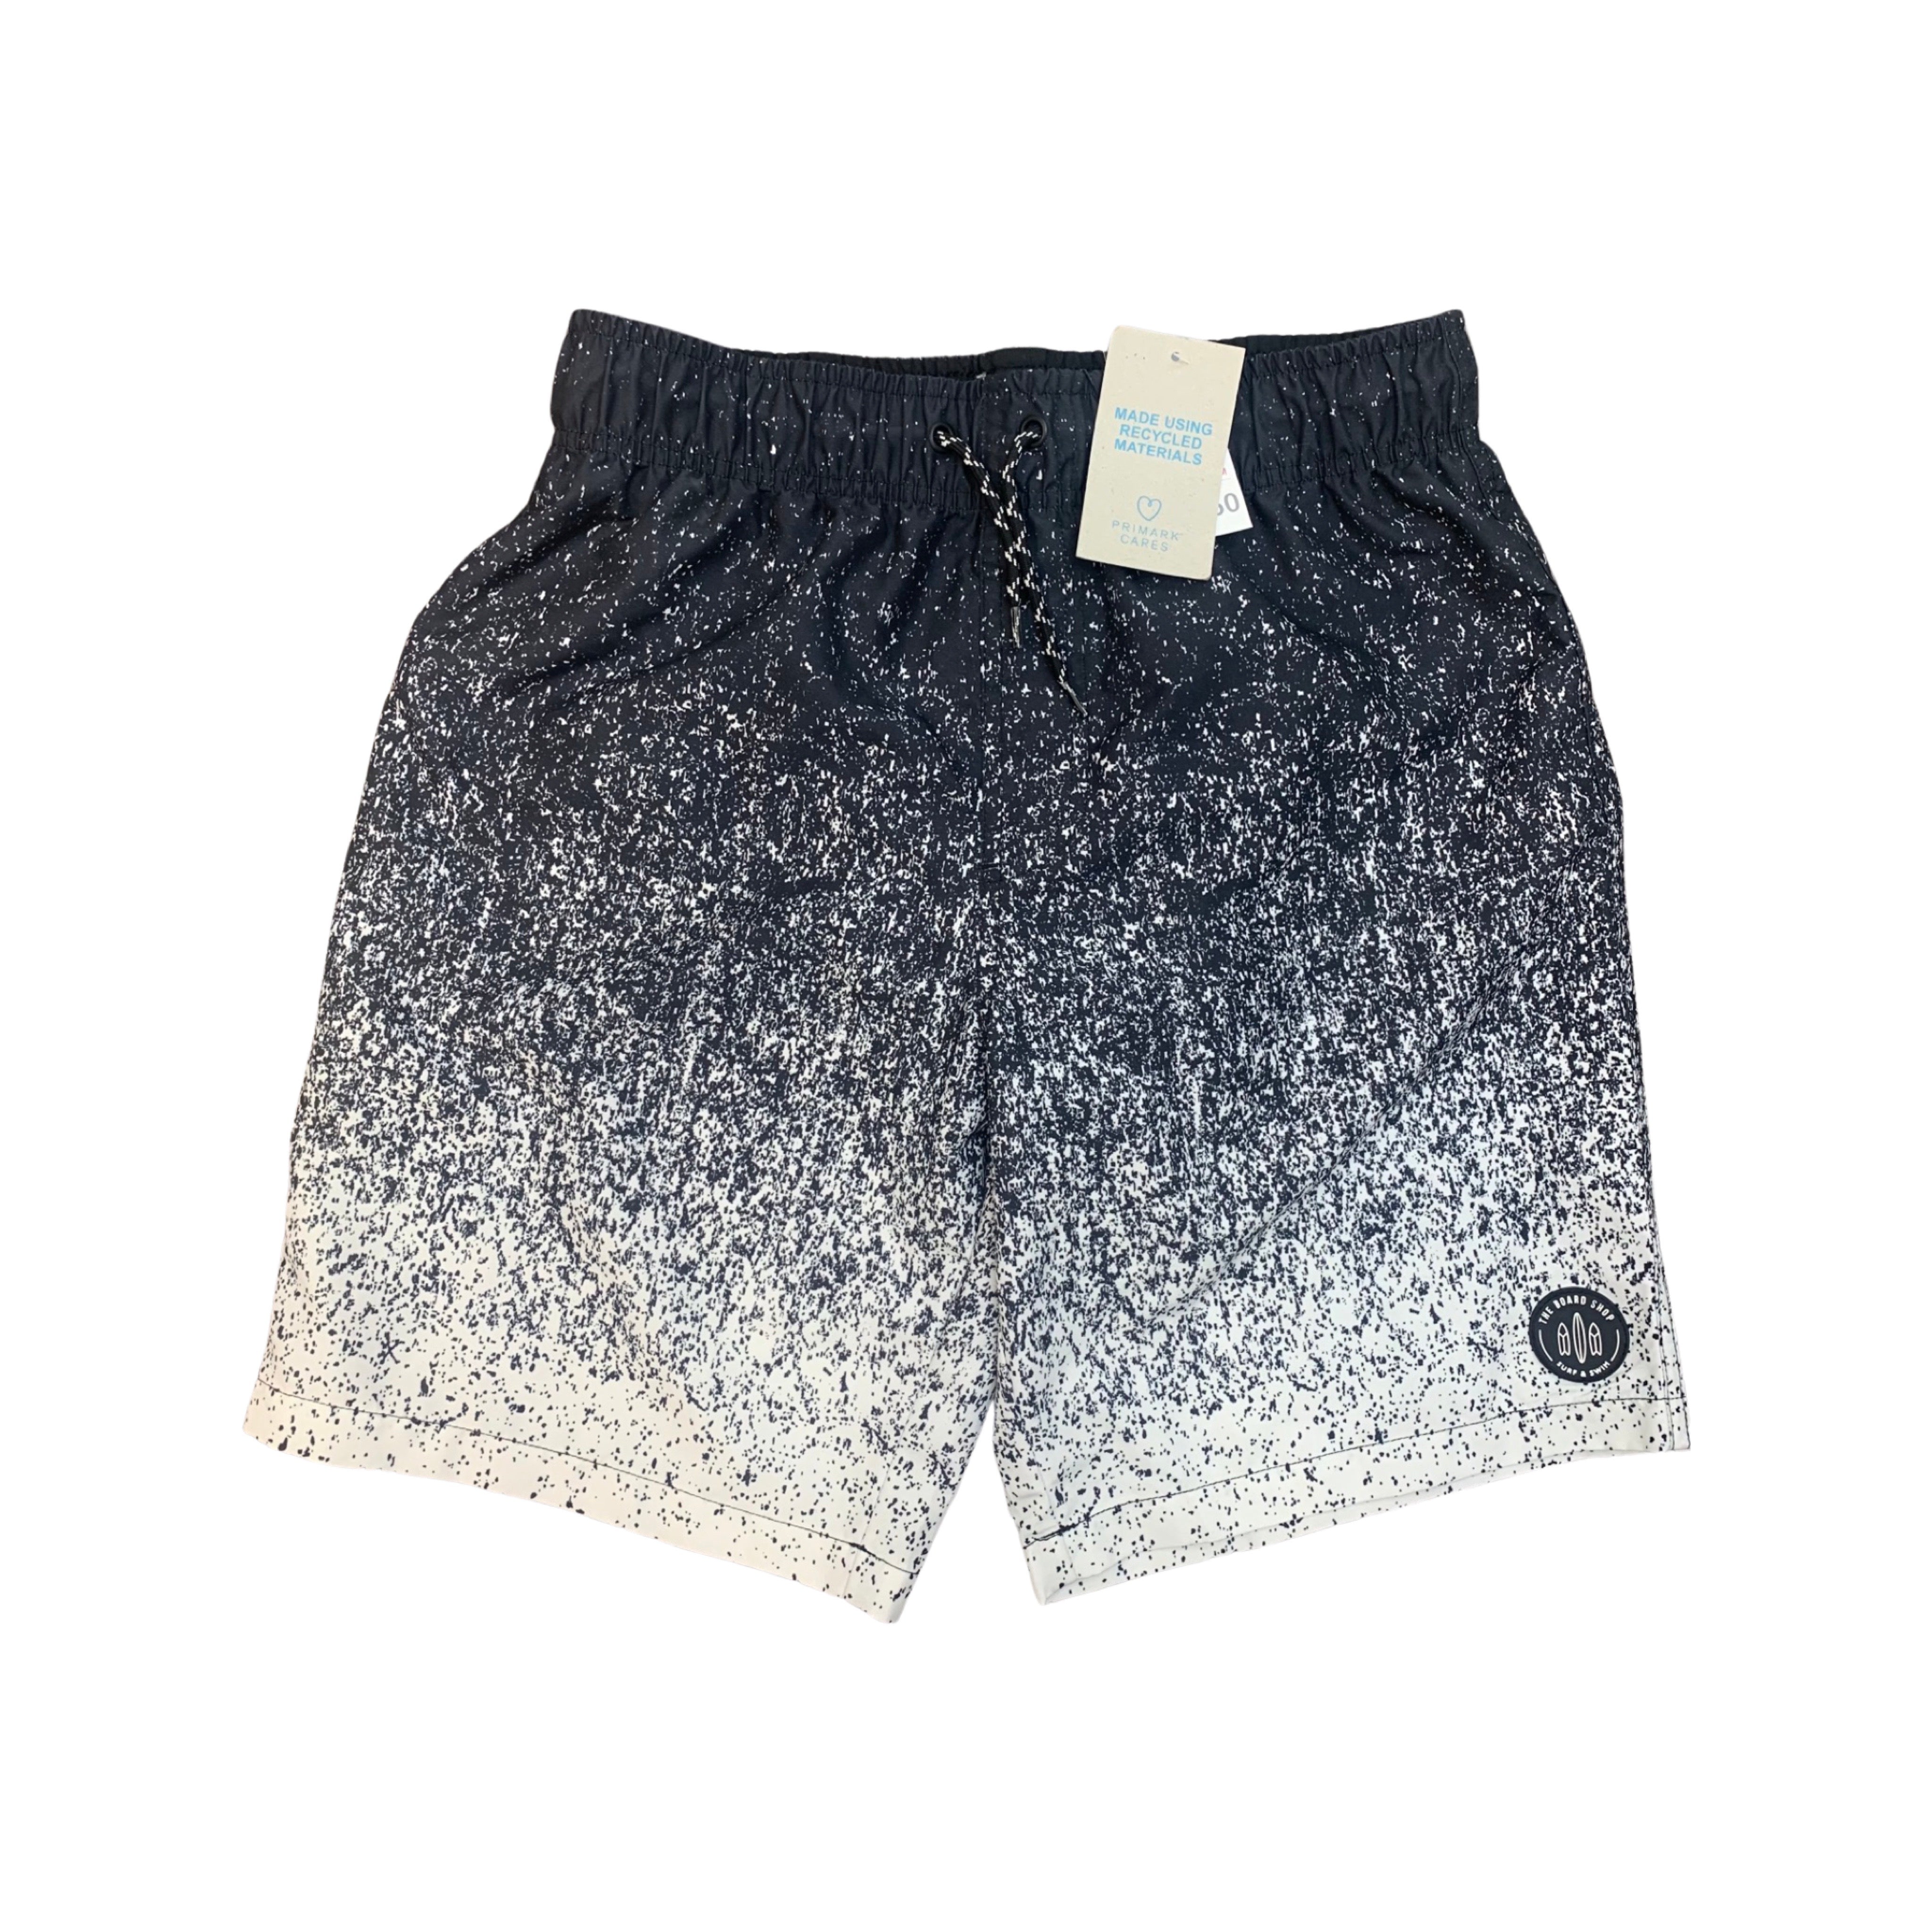 Primark Ombre Swimming Shorts Boys 13-14 Years BNWT